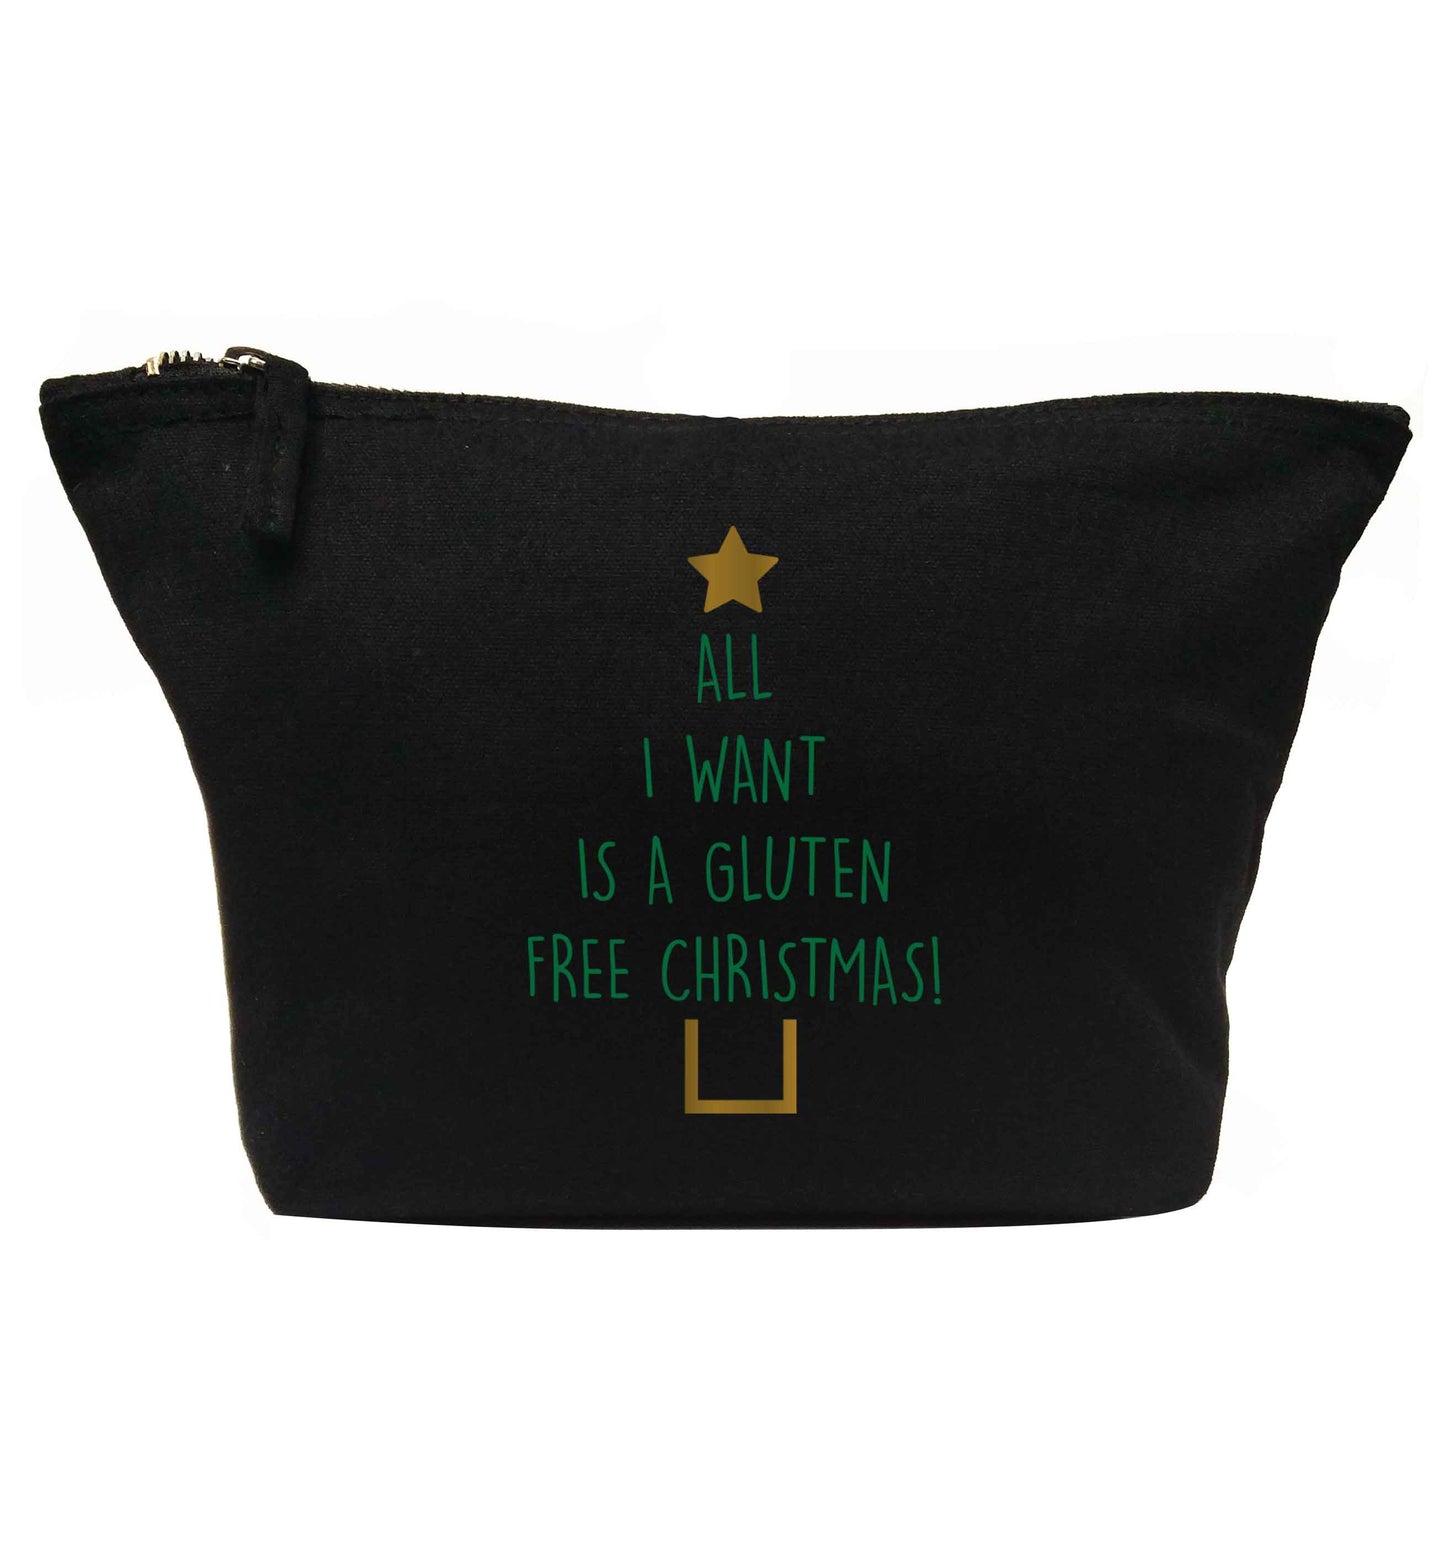 All I want is a gluten free Christmas | makeup / wash bag